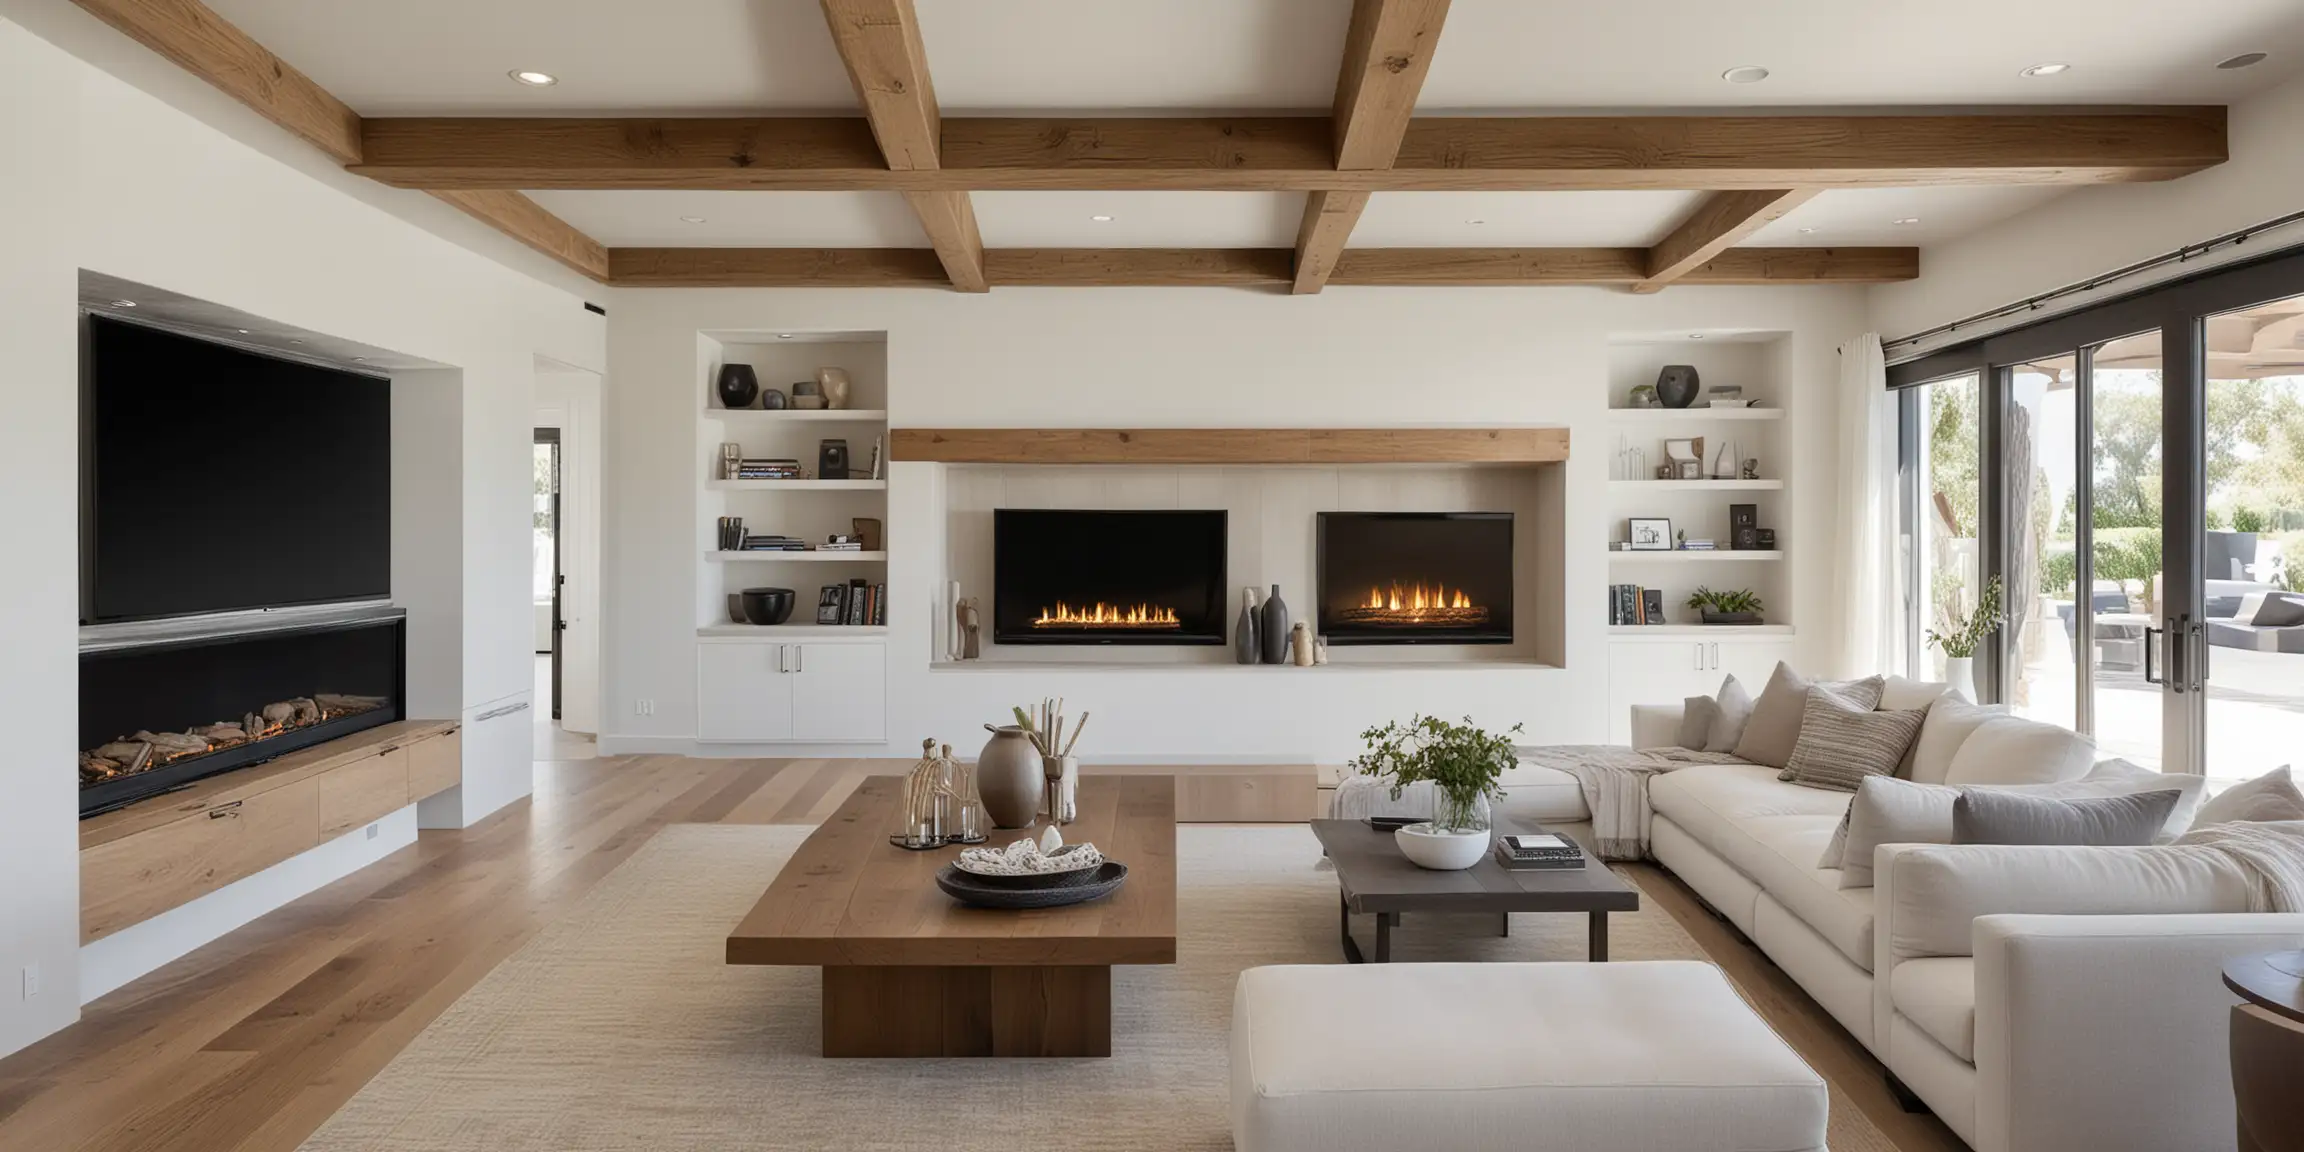 California contemporary living room, wood beams ceiling, white walls, wood built in cabinets, tv, white oak floor, floor to ceiling fireplace